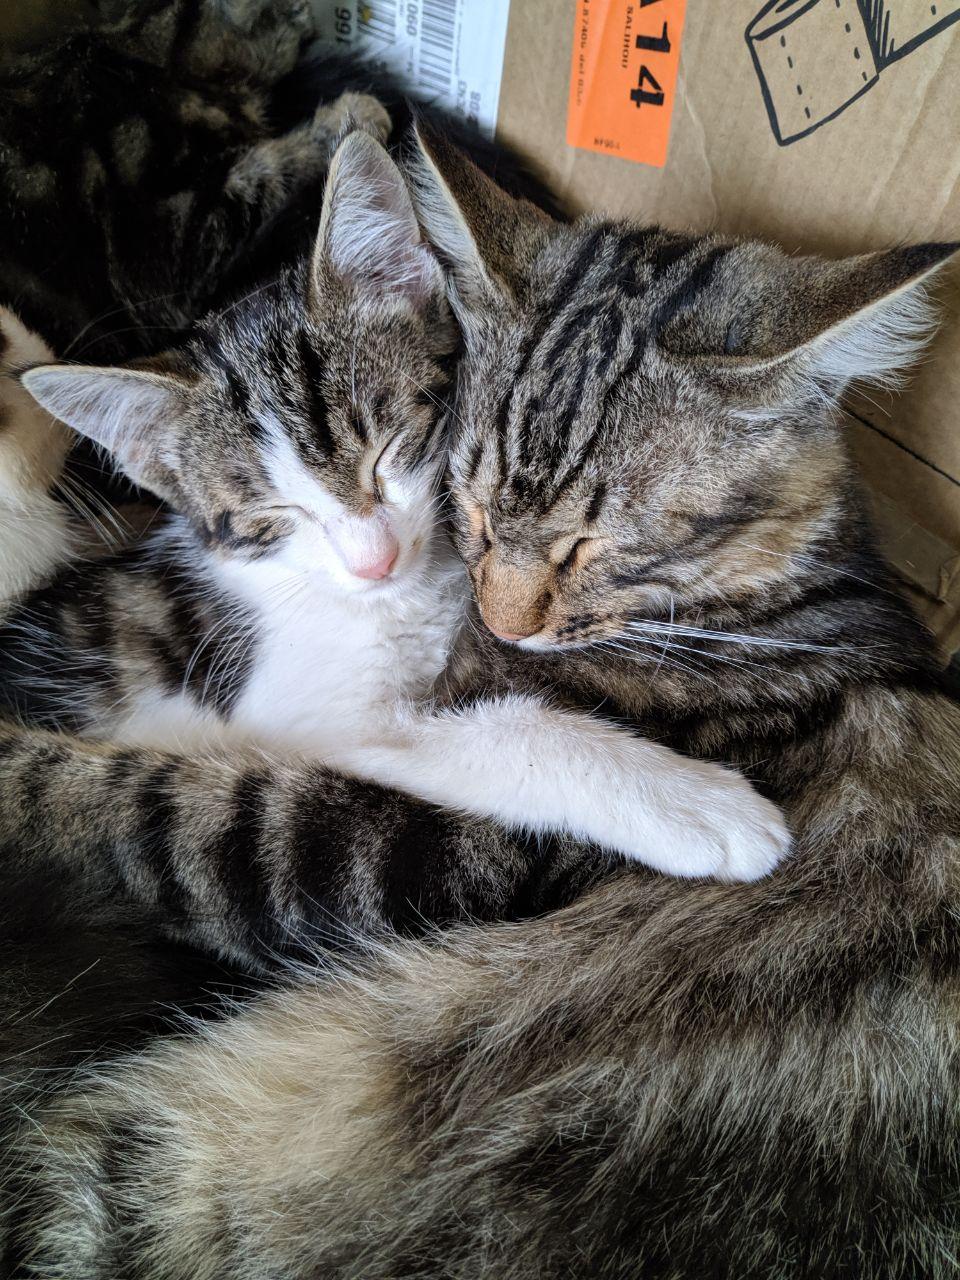 Two cats, Mimma and Camilla, hugging each other